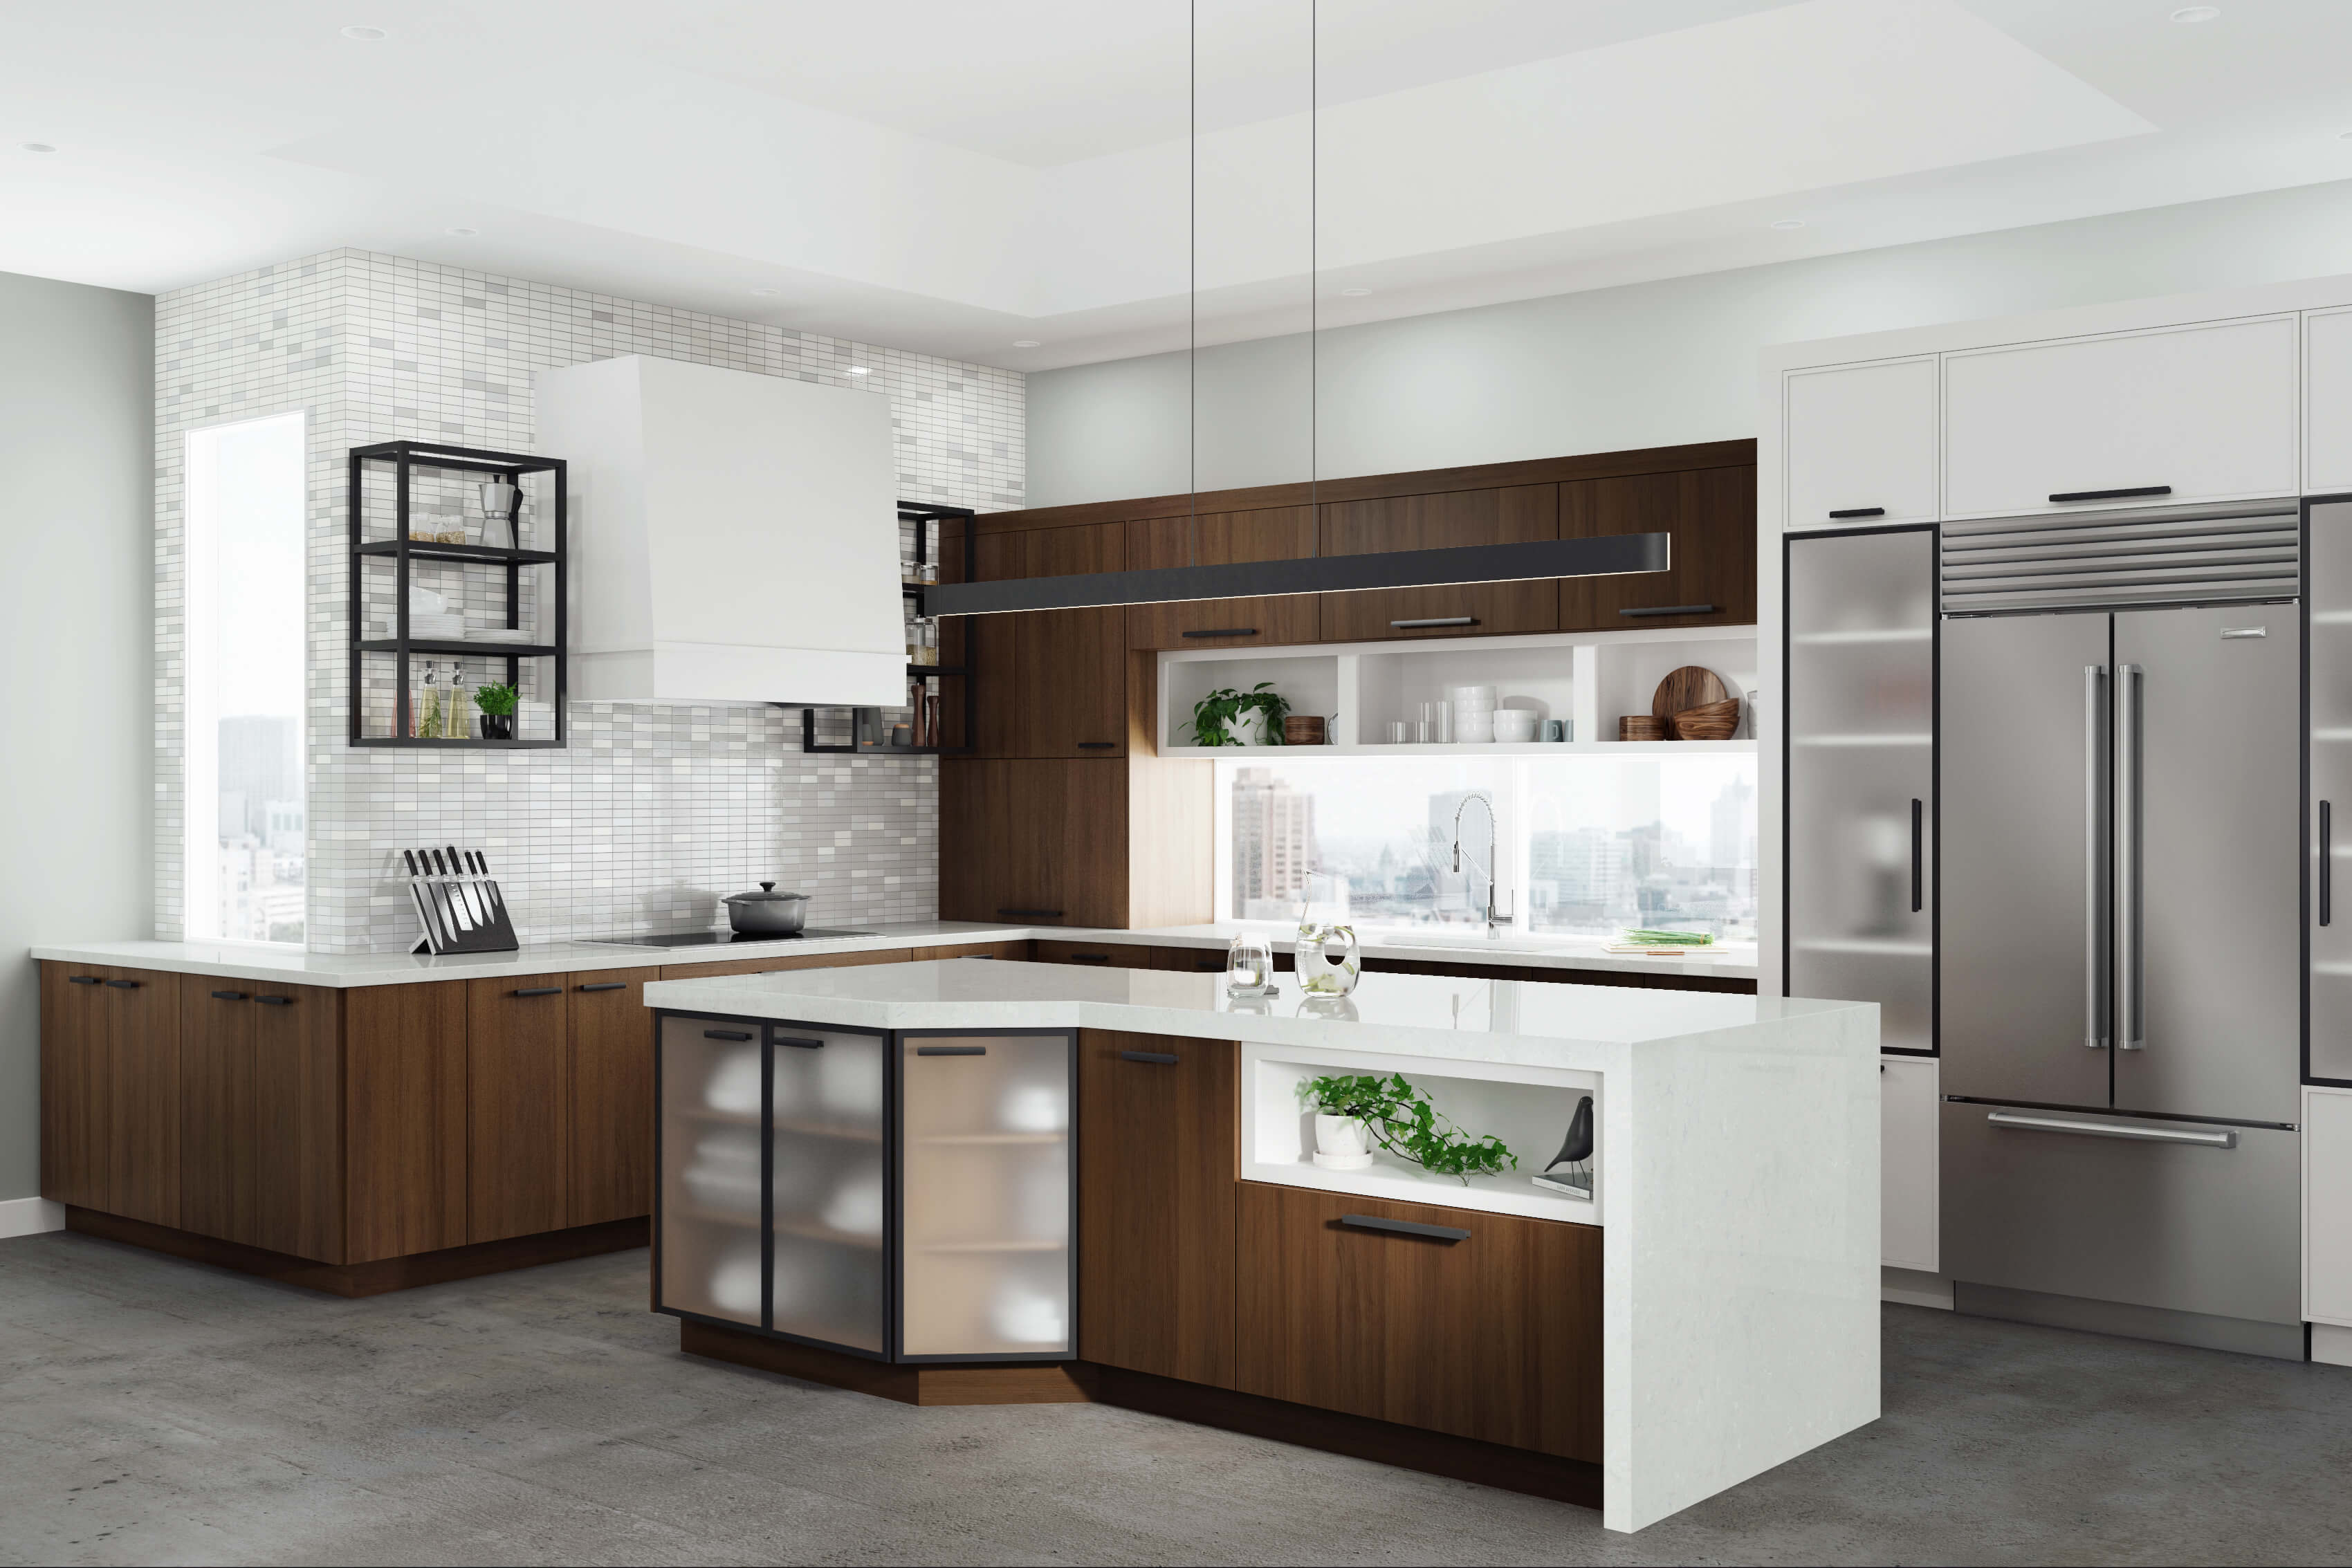 A modern kitchen in an urban city appartment with walnut cabinets and white painted modern wood hood and accent cabinets. Matte black metal cabinet doors and floating shelves add an industrial flavor to the overall design.